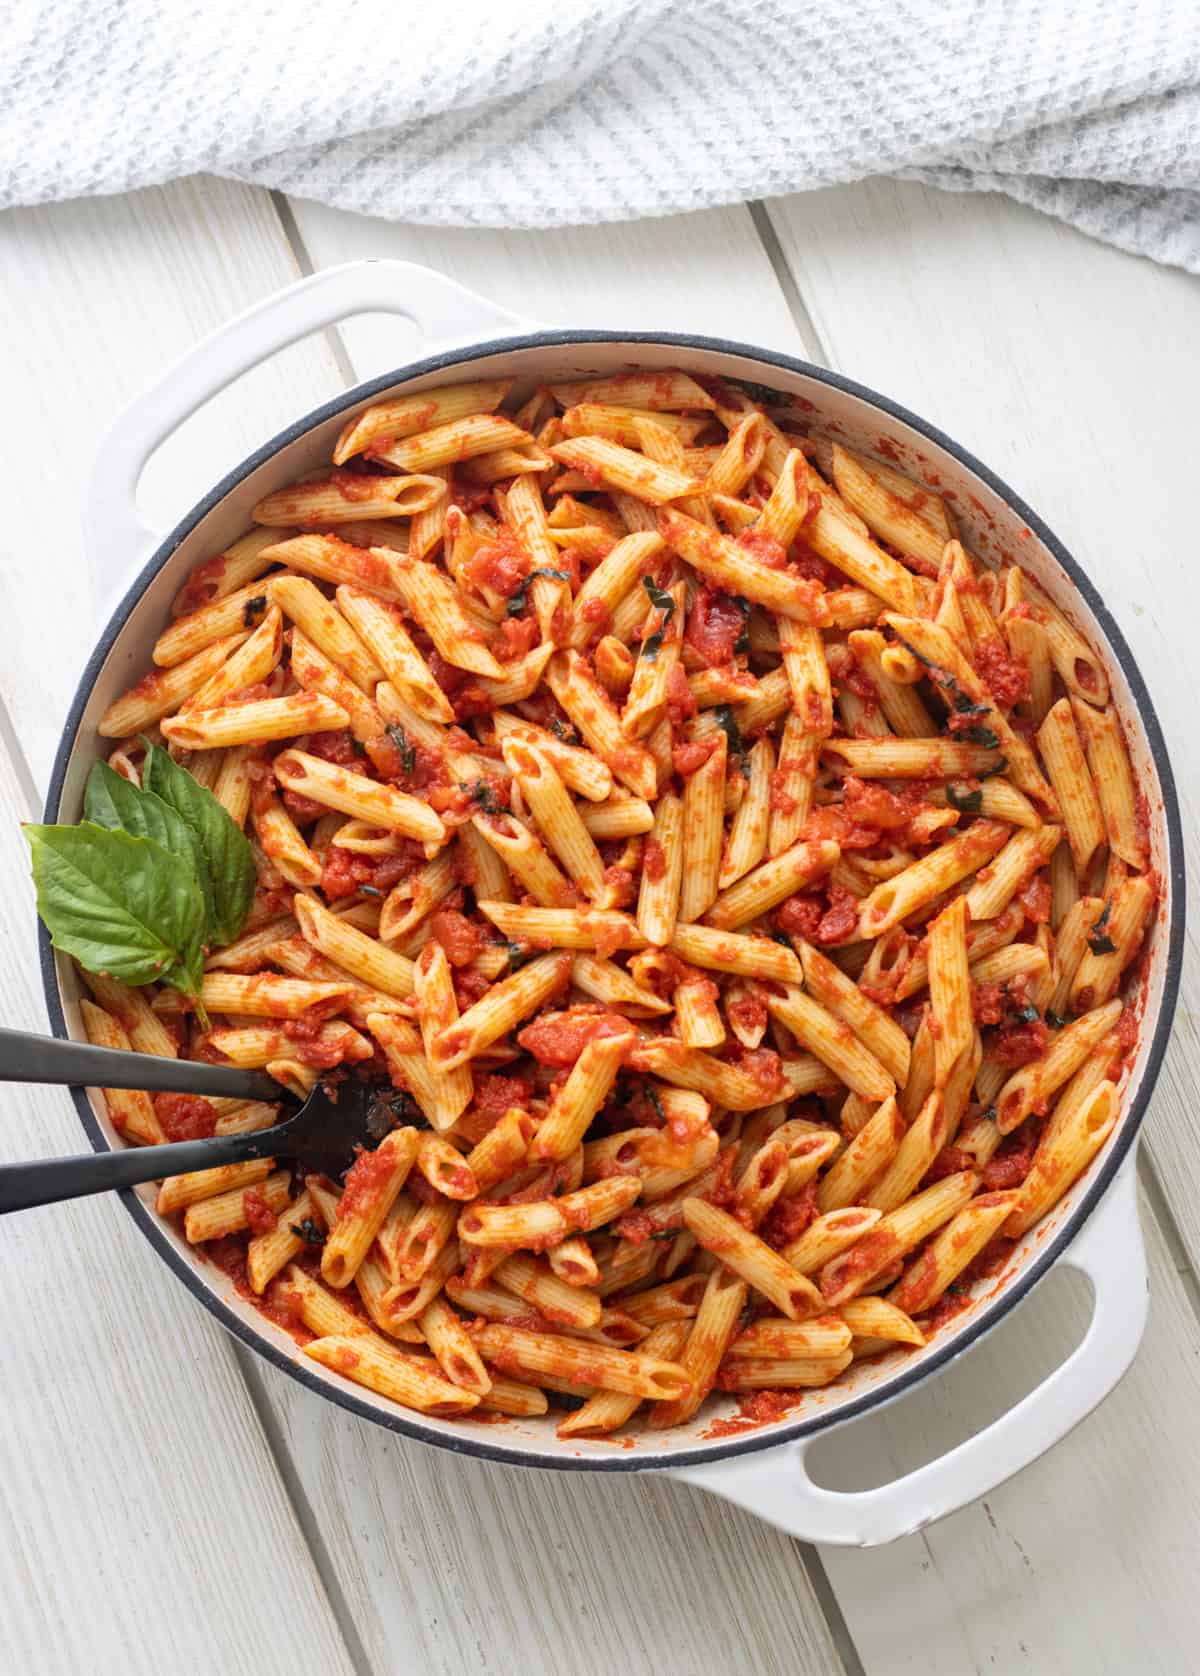 Penne pomodoro in a white casserole dish with basil leaves and spoons.